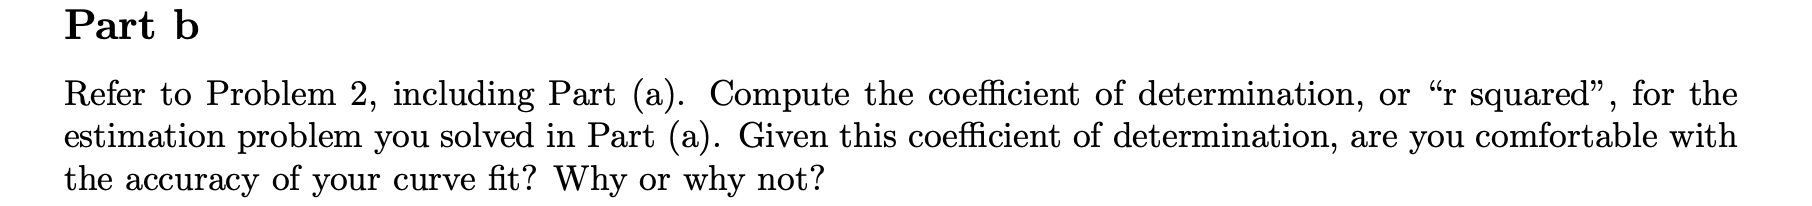 Part b
Refer to Problem 2, including Part (a). Compute the coefficient of determination, or "r squared", for the
estimation problem you solved in Part (a). Given this coefficient of determination, are you comfortable with
the accuracy of your curve fit? Why or why not?
